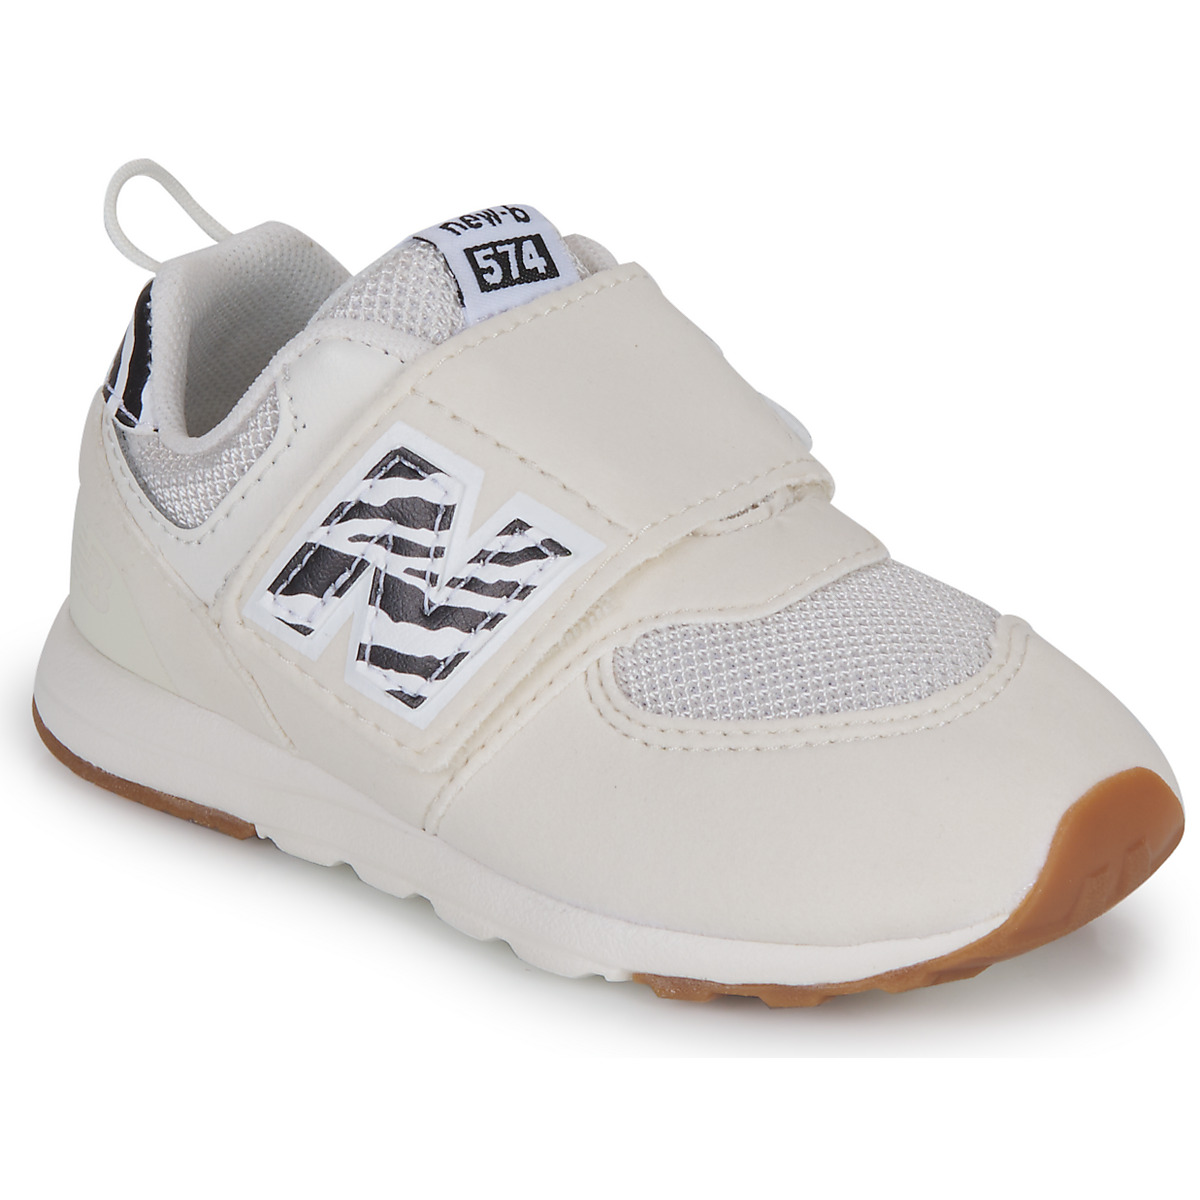 Chaussures Fille Baskets basses New Balance 574 